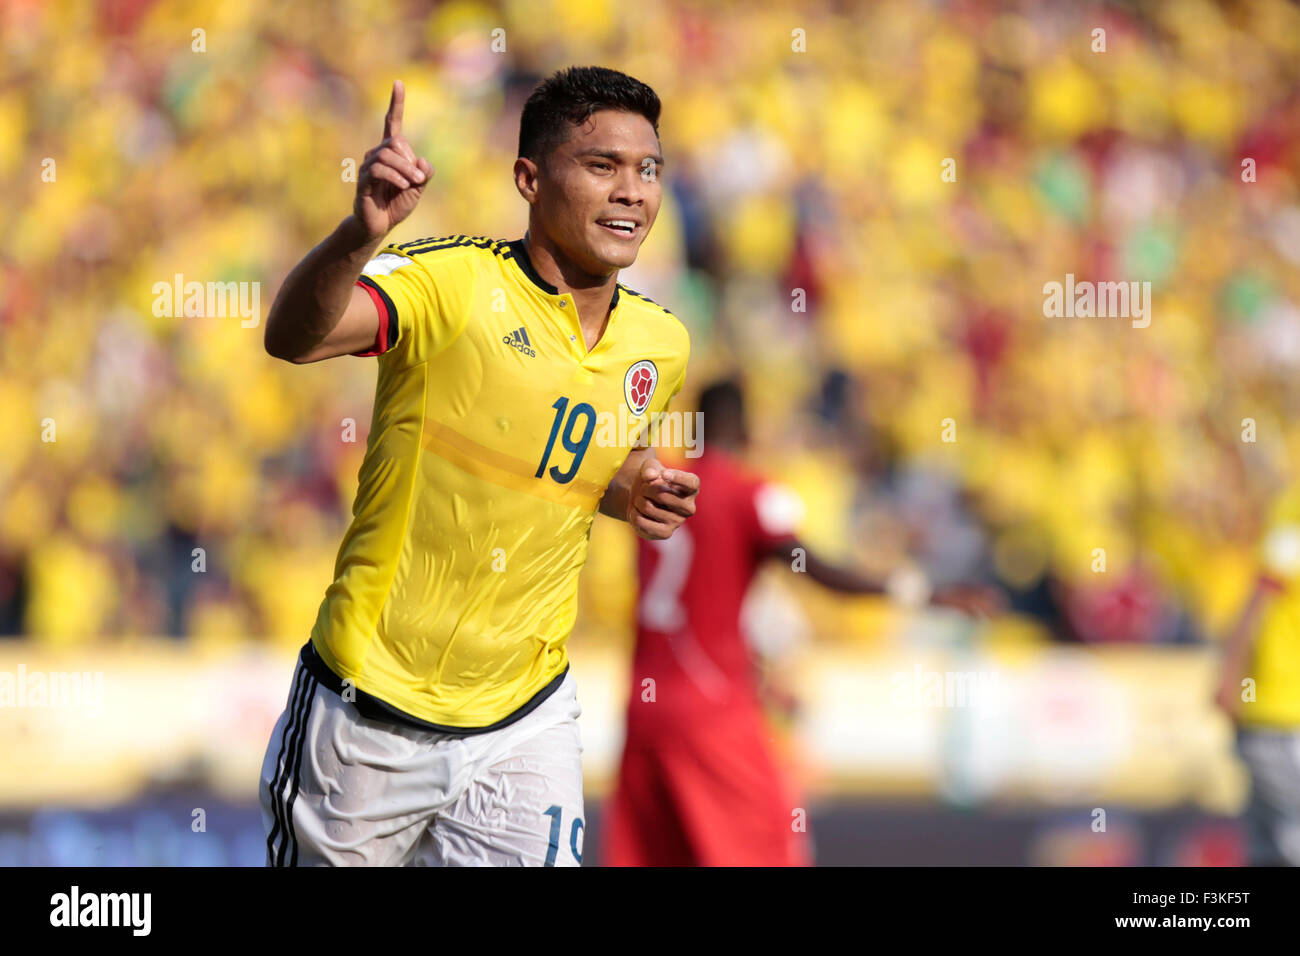 Barranquilla, Colombia. 8th Oct, 2015. Colombia's Teofilo Gutierrez celebrates during the qualifying match for World Cup Russia 2018 against Peru, held at Metropolitan Stadium Roberto Melendez, in Barranquilla, Colombia, on Oct. 8, 2015. Colombia won 2-0. Credit:  Juan Paez/COLPRENSA/Xinhua/Alamy Live News Stock Photo